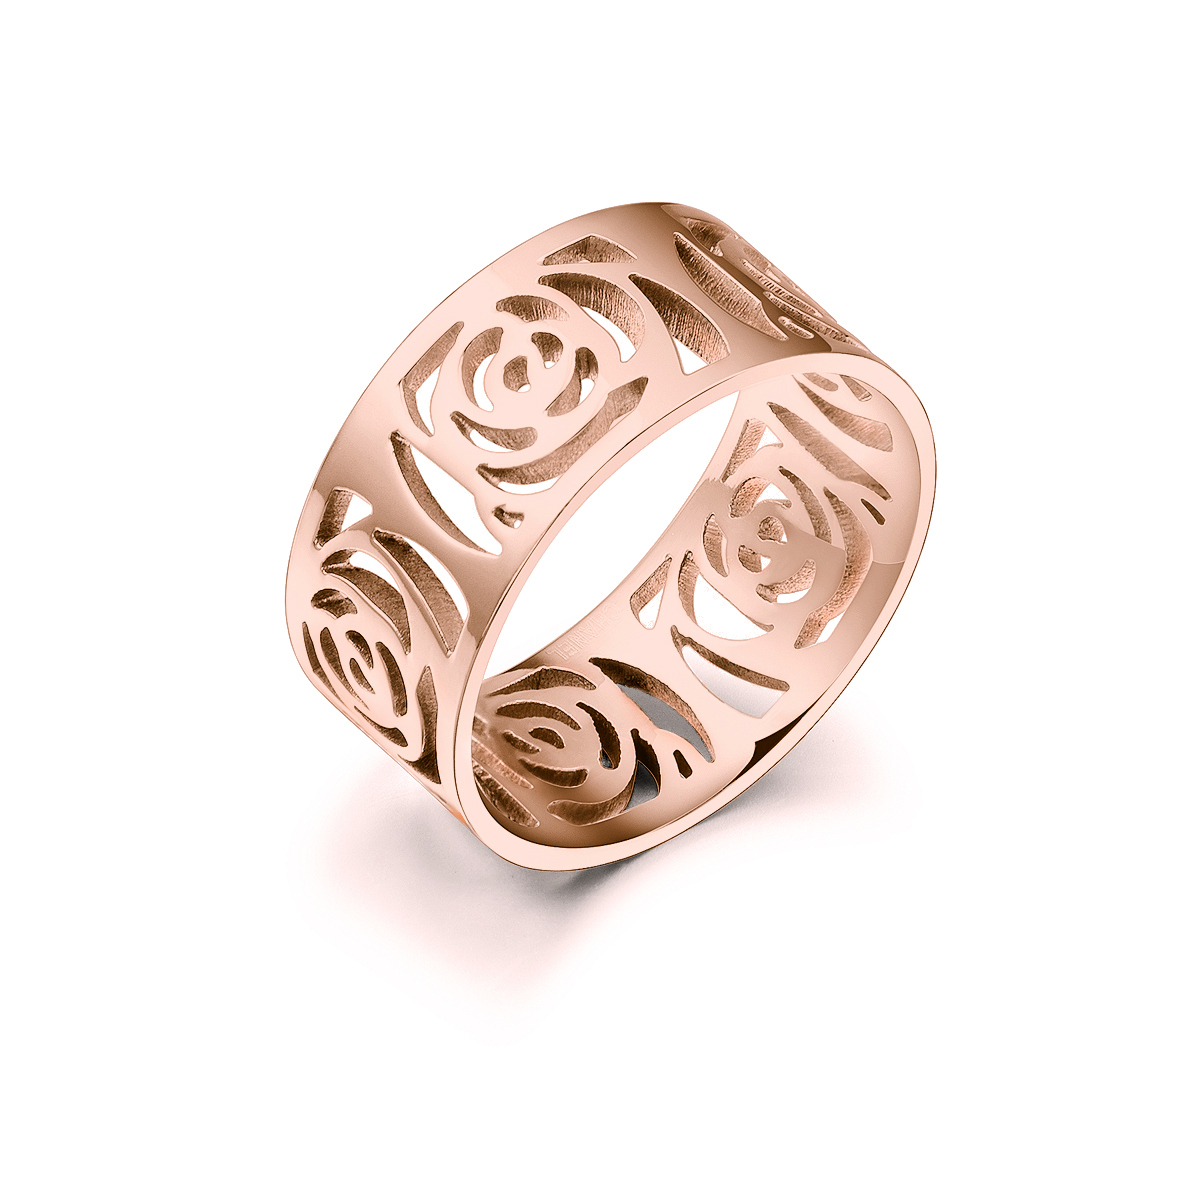 rose-gold-jewelry-florid-ring-cutout-plated-18k-rose-gold-ring-fashion ...